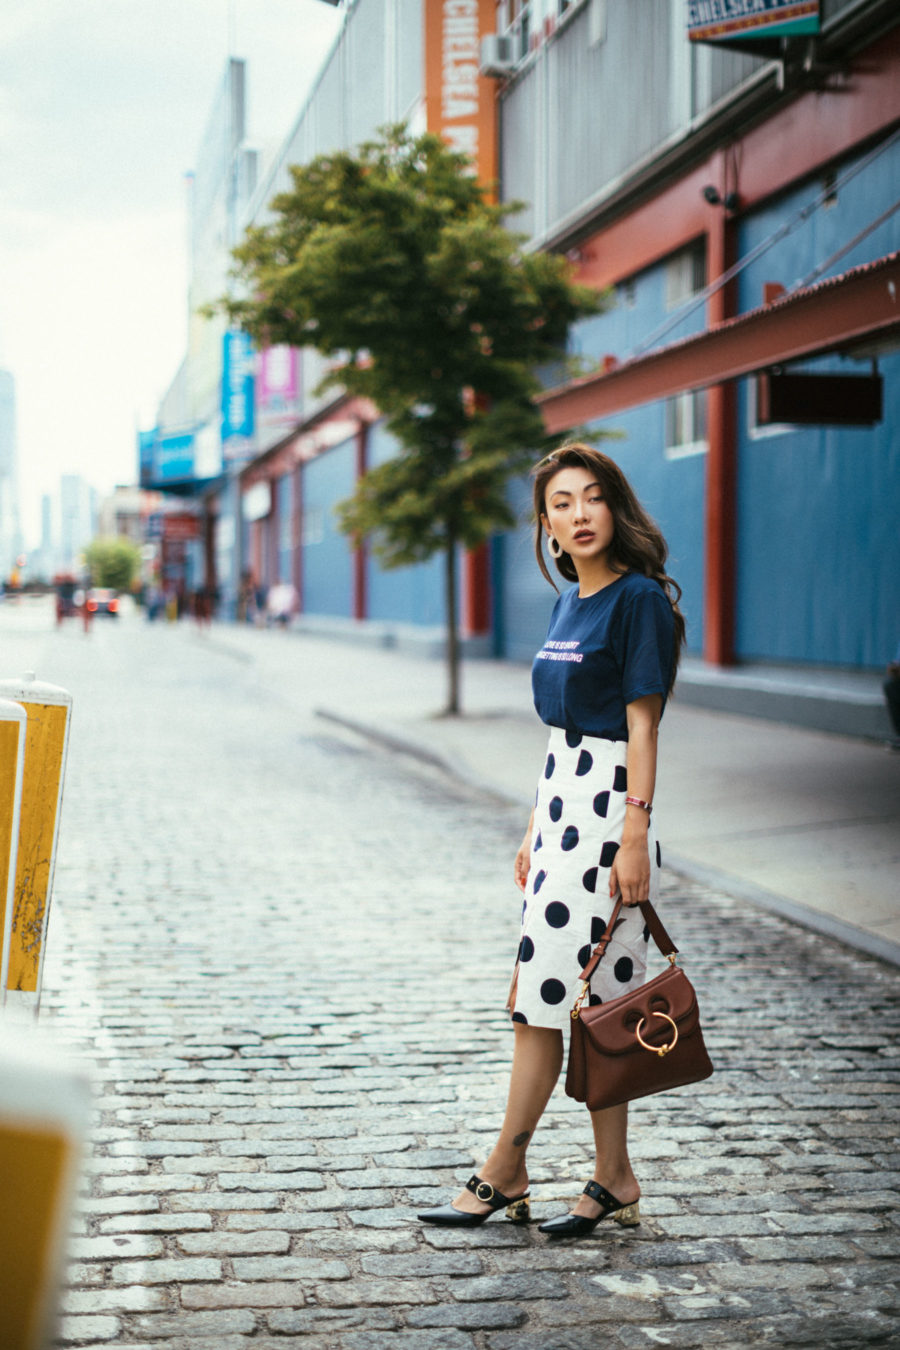 Stylish but Office Friendly Summer Outfit Ideas - polka dot skirt, pencil skirt, office outfit ideas // Notjessfashion.com